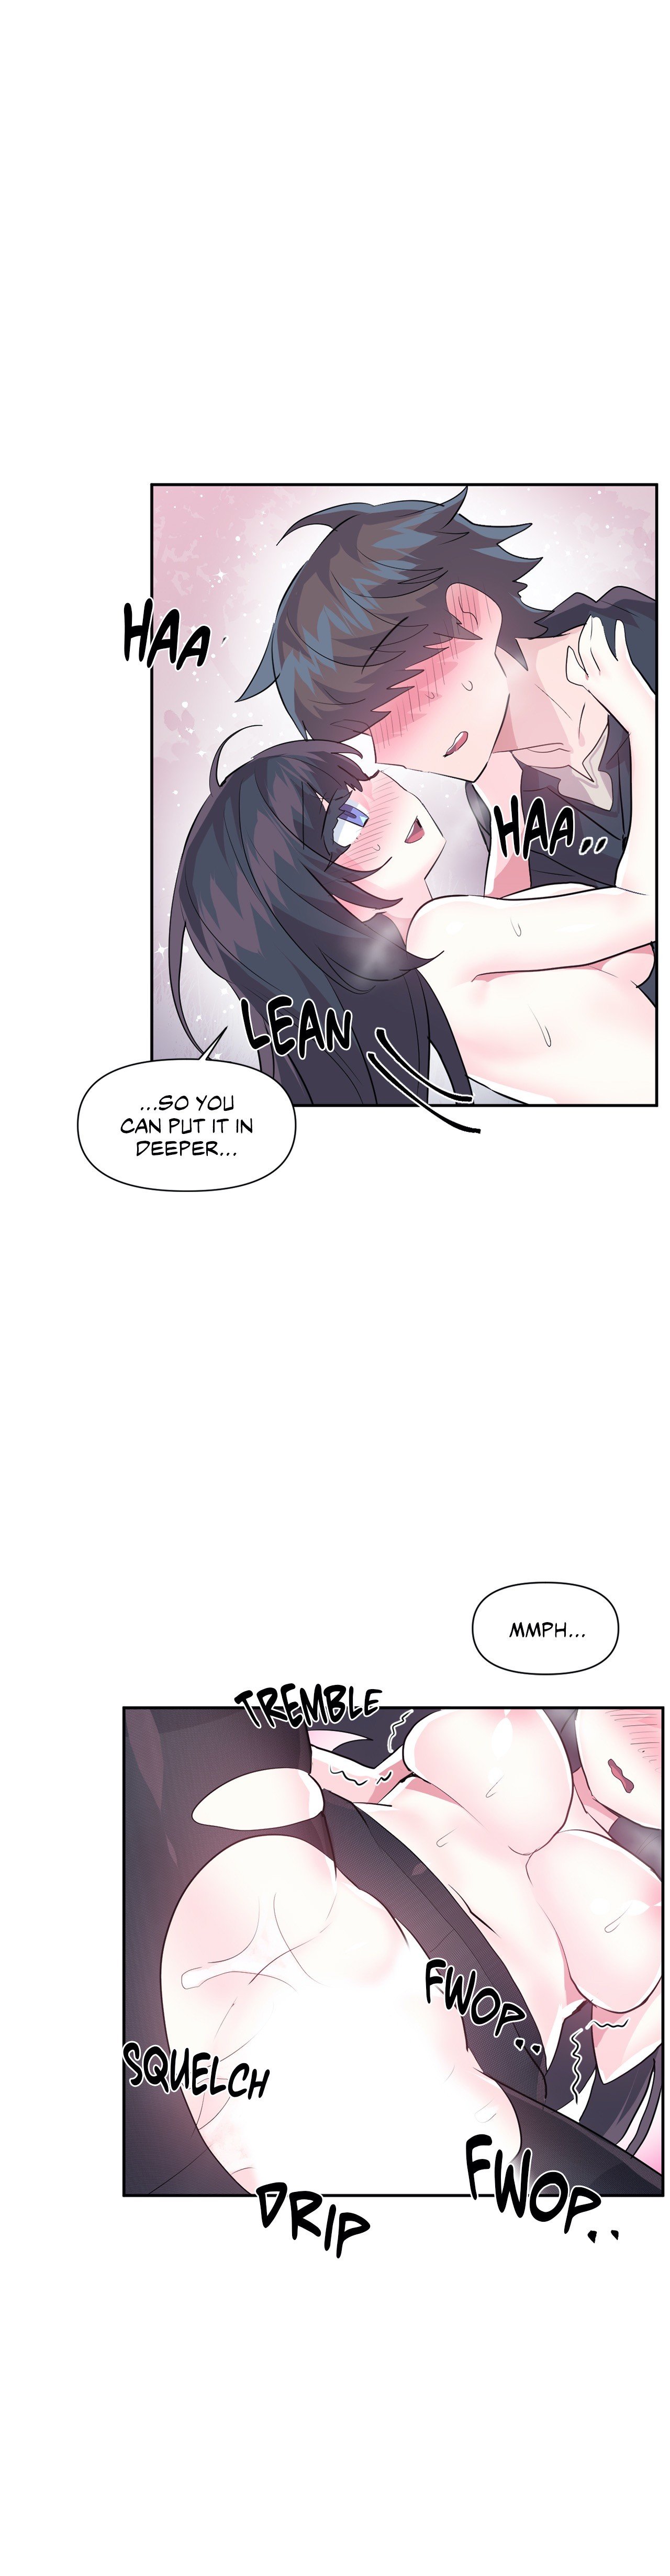 log-in-to-lust-a-land-chap-35-4